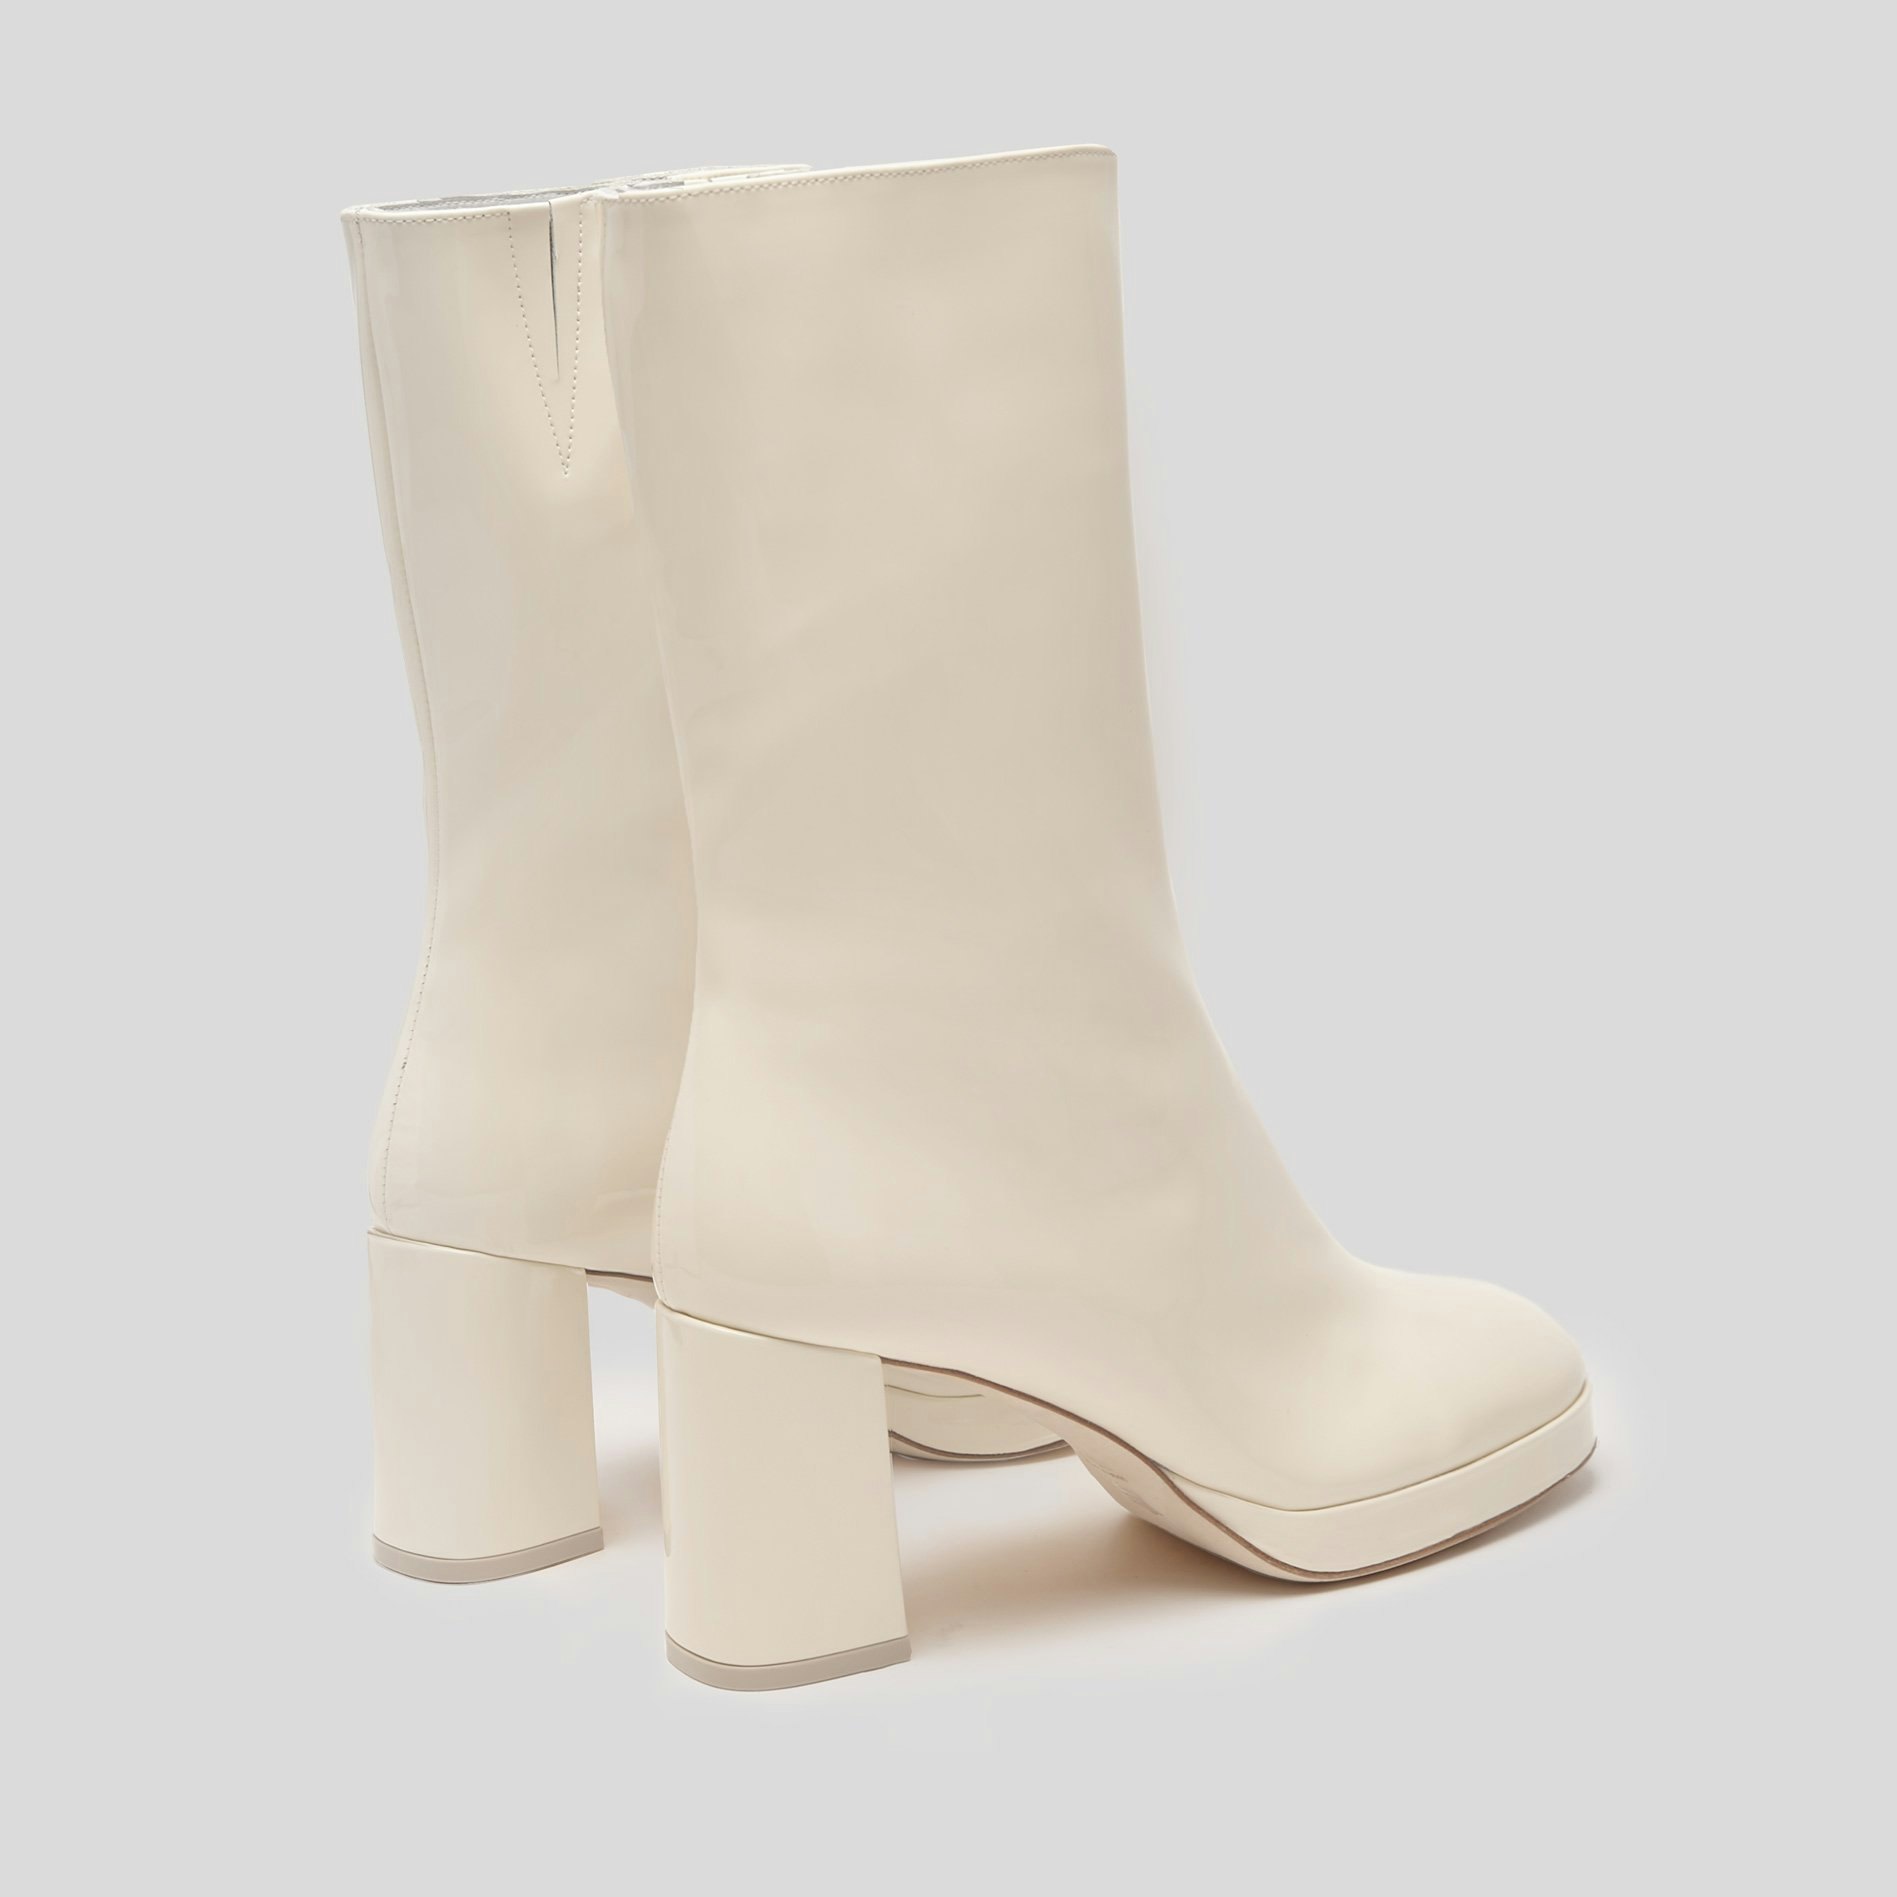 14 White Boots Outfits That Will Make 